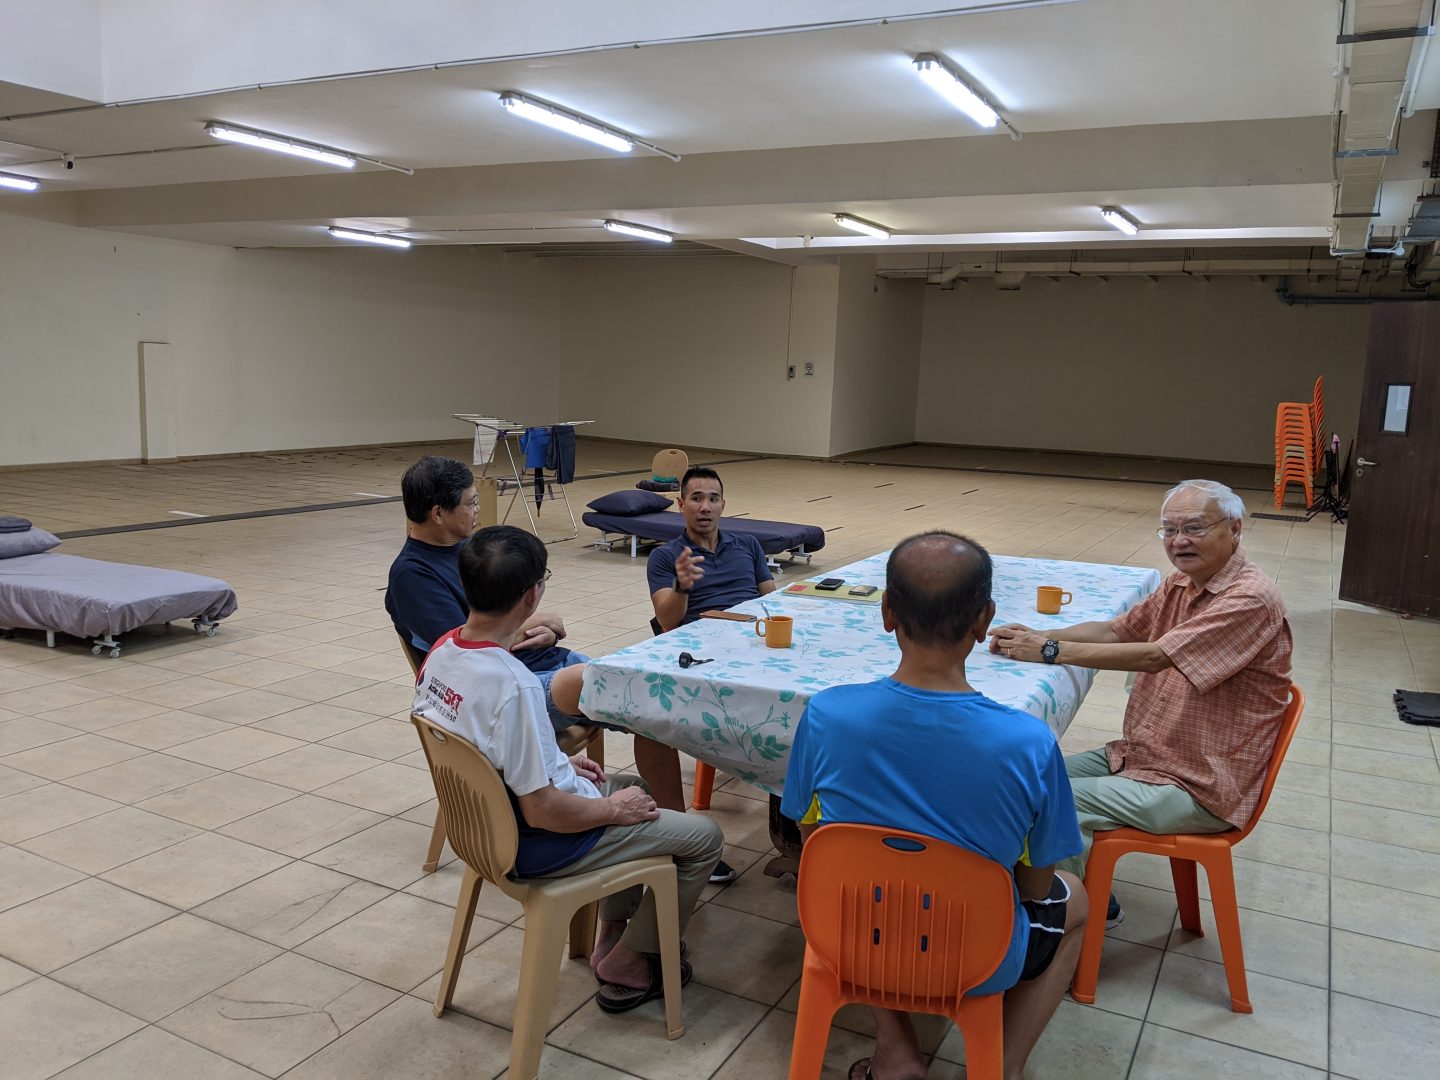 Every night, befrienders from Yio Chu Kang Chapel come down to fellowship with the homeless staying in their church. The church also provides beds, warm showers and snacks. Photo by Gracia Lee.